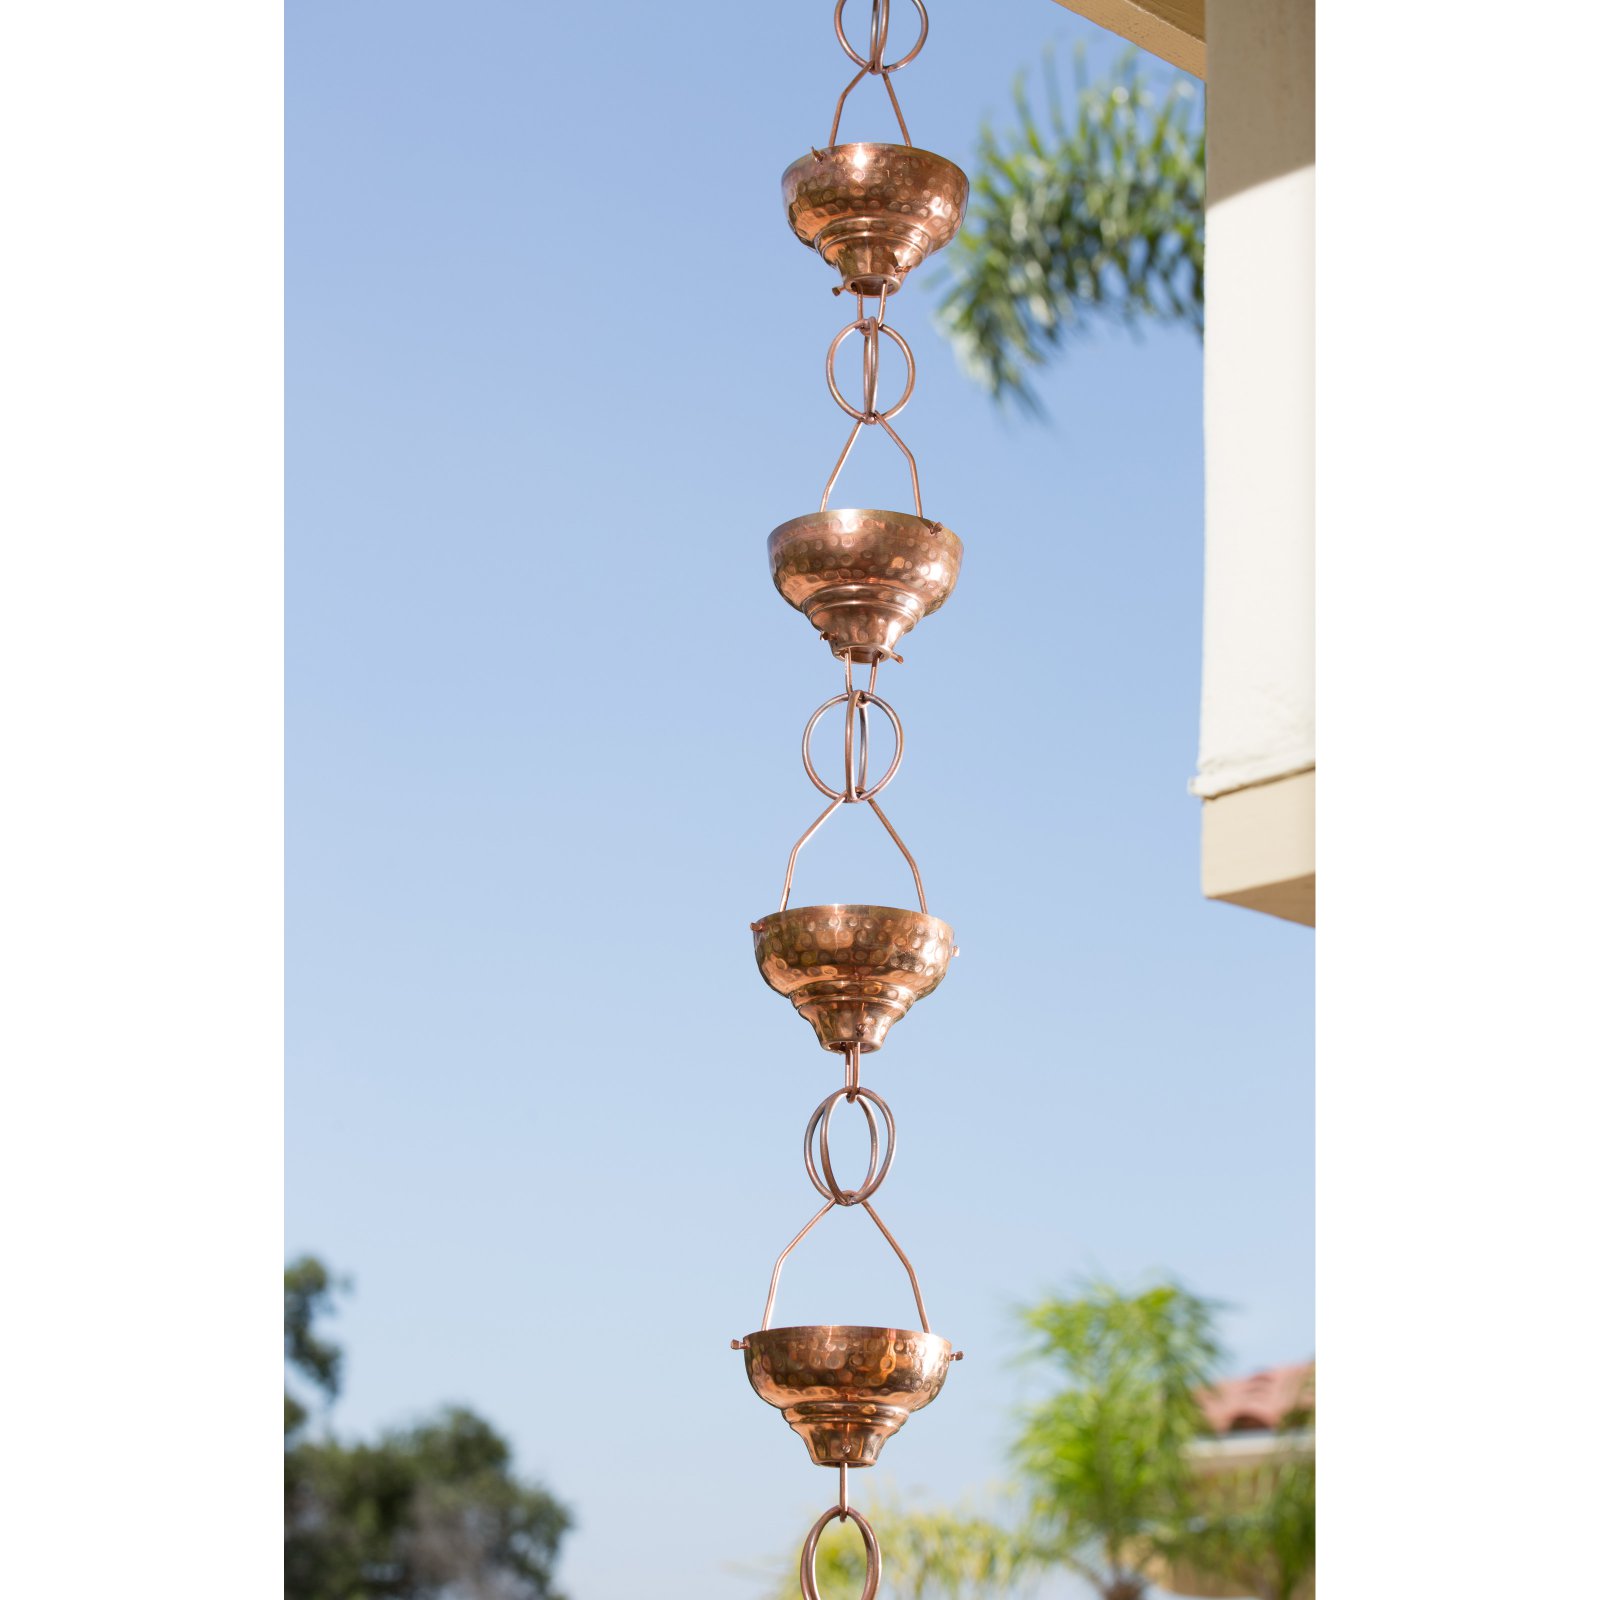 Monarch Rain Chains Pure Copper Eastern Hammered Cup Rain Chain Replacement Downspout for Gutters, 8-1/2 Feet Length - image 2 of 3